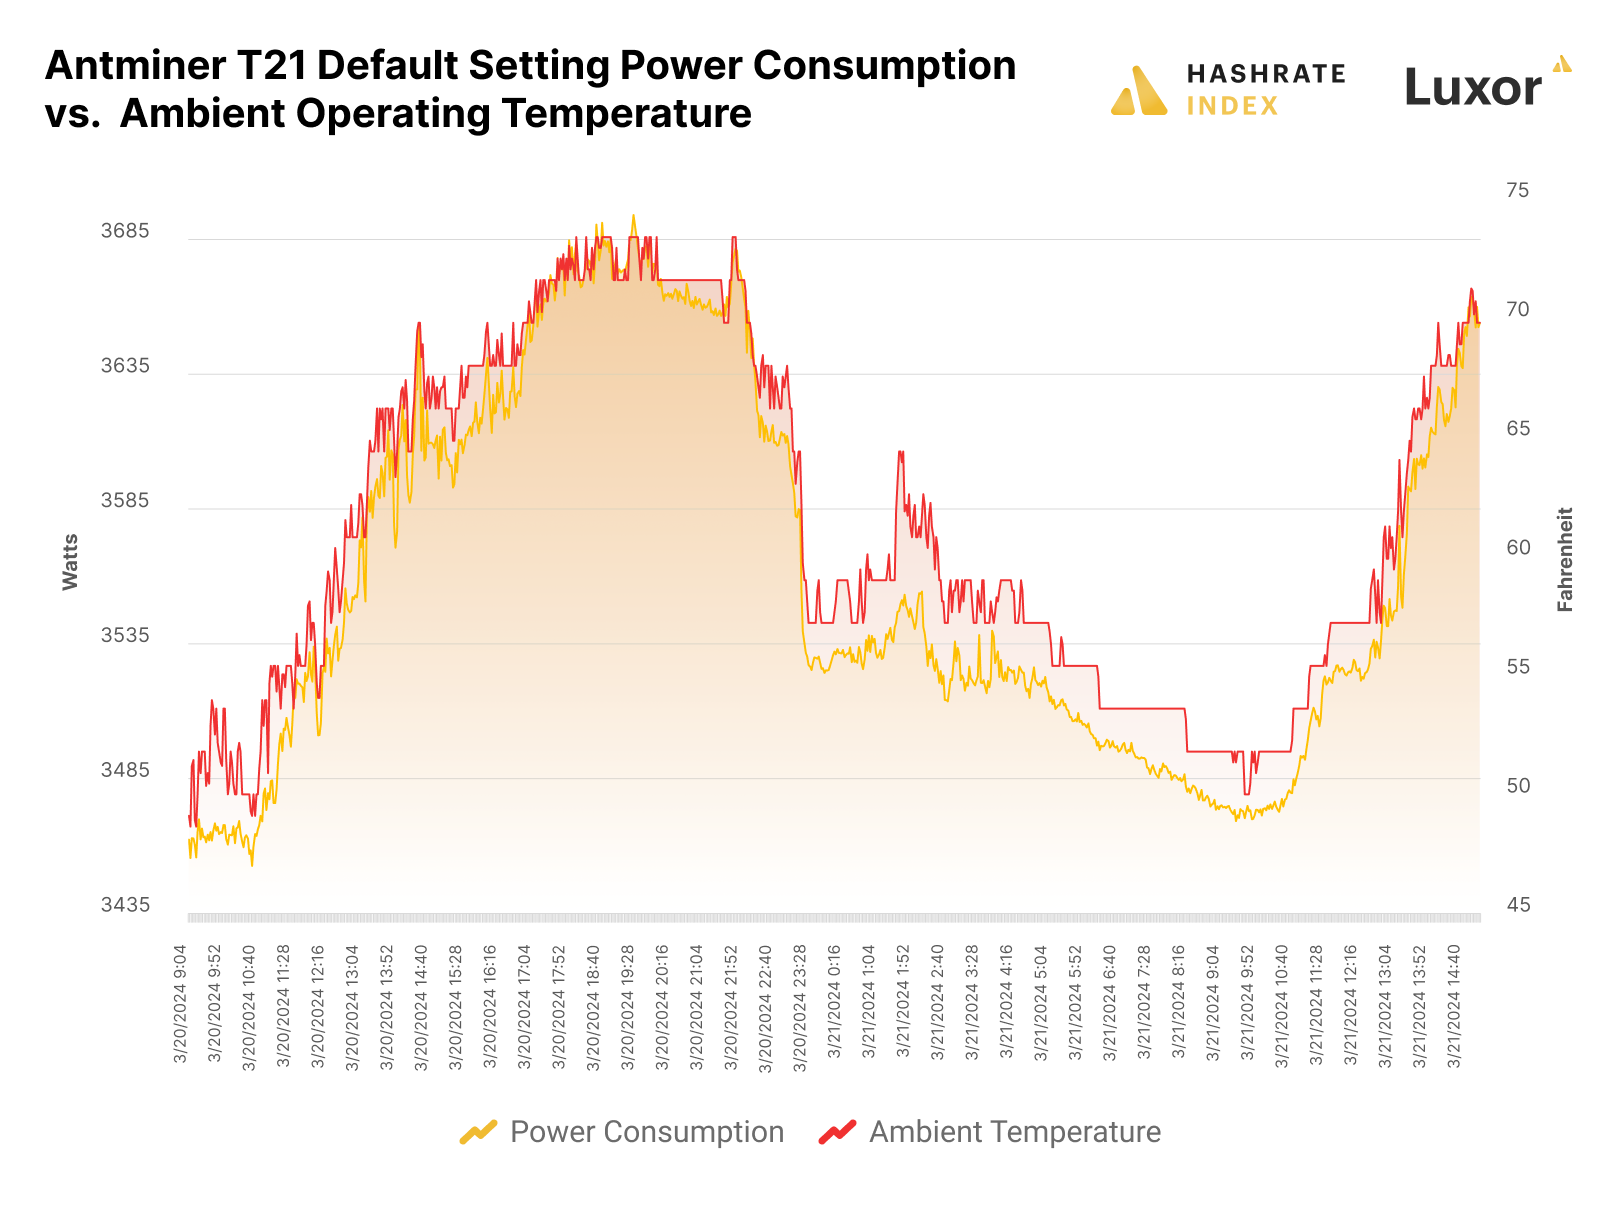 Antminer T21 power consumption and temperature